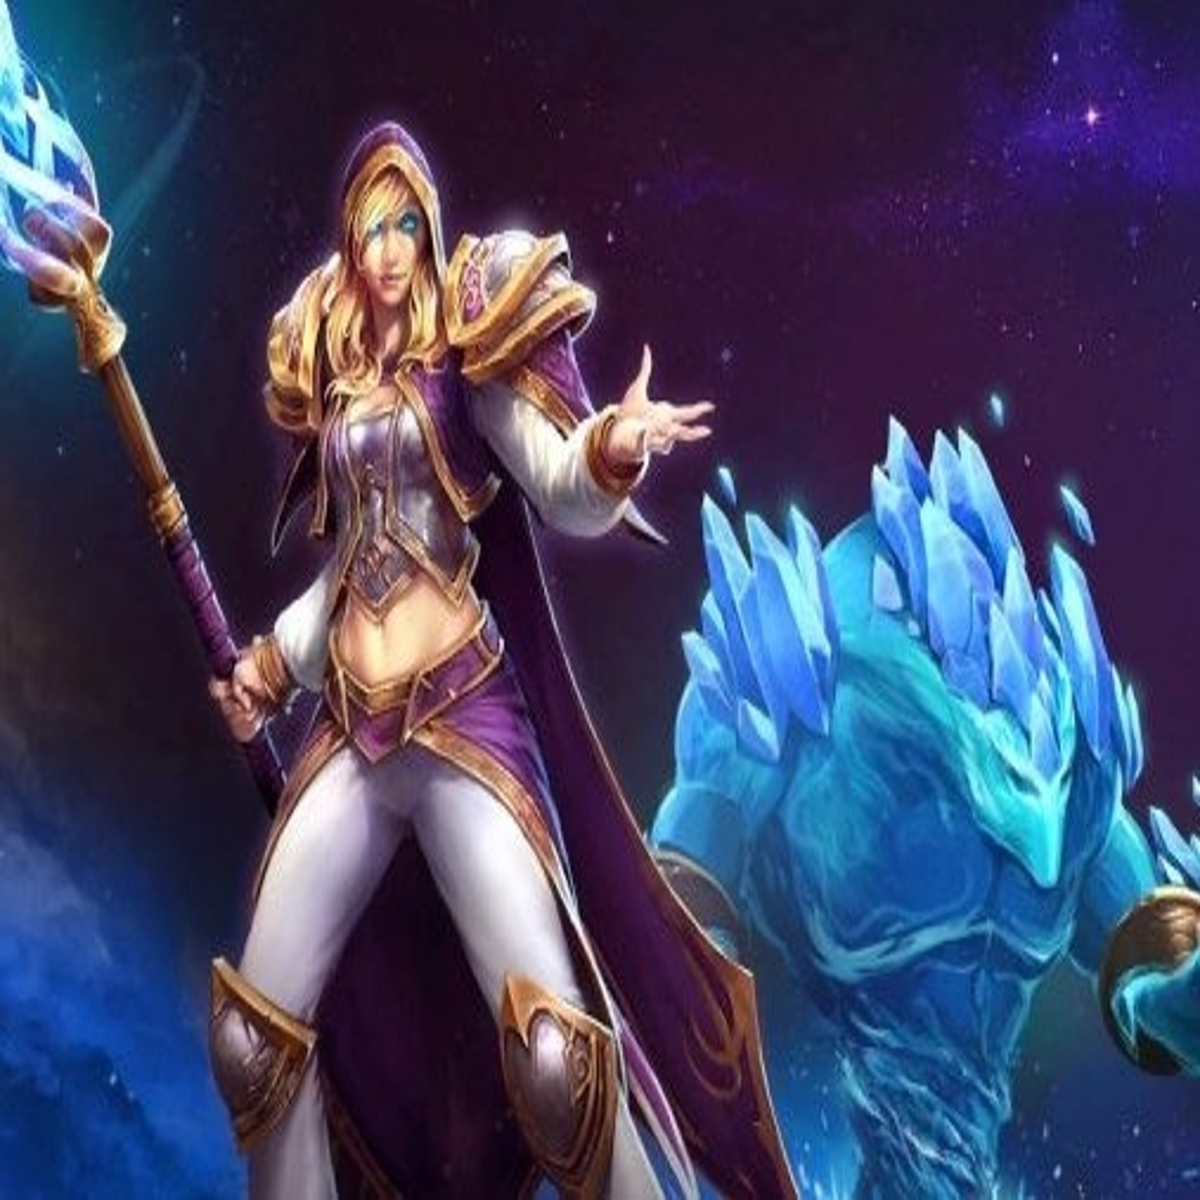 Heroes of the Storm: Ana tips guide